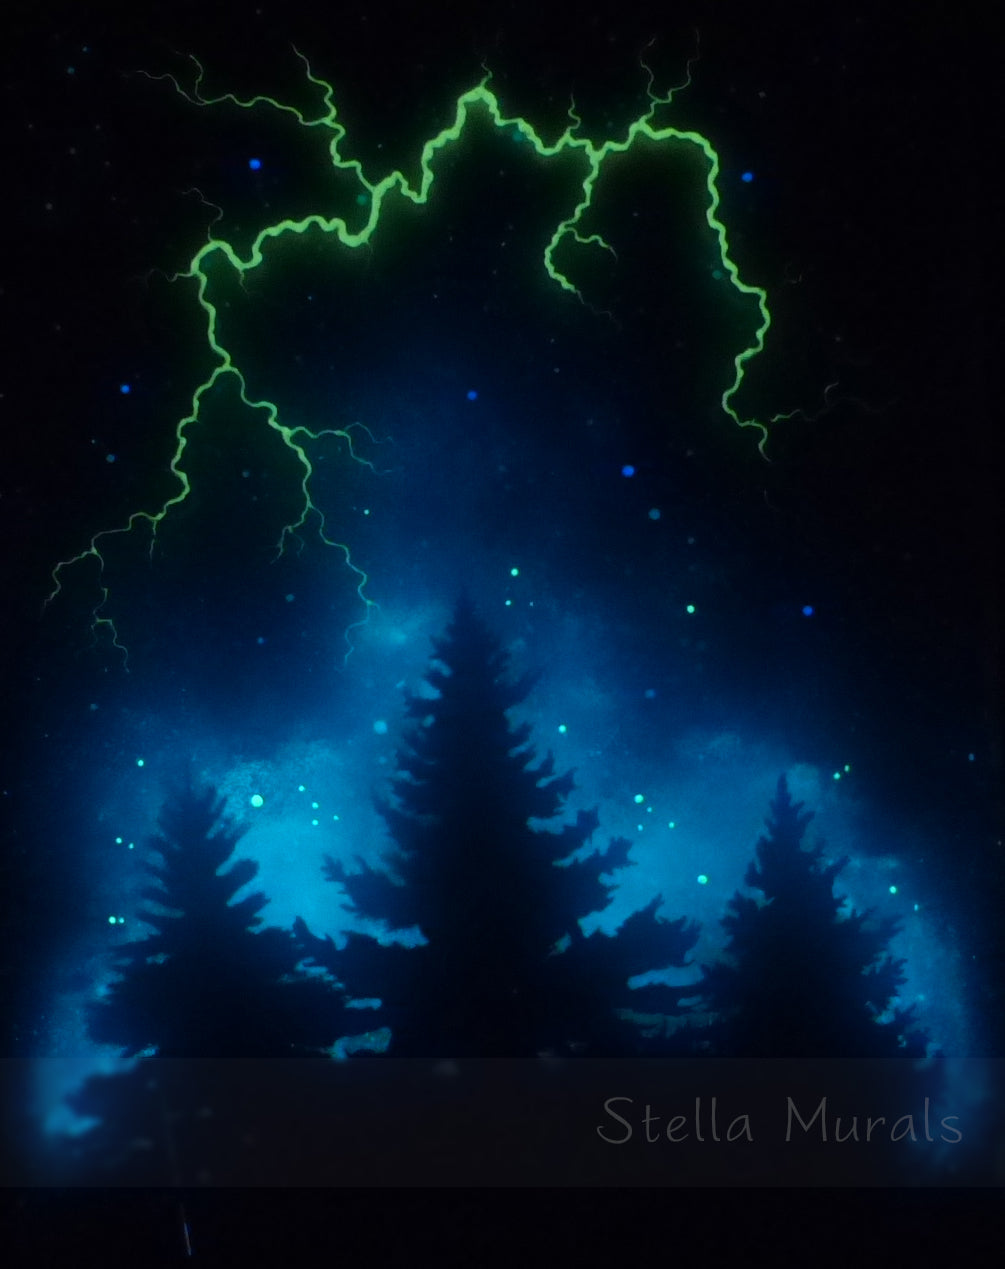 A glow-in-the-dark wall mural featuring a dynamic scene of trees silhouetted against a luminescent night sky. Lightning bolts illuminate the darkness, creating a display of nature's power.